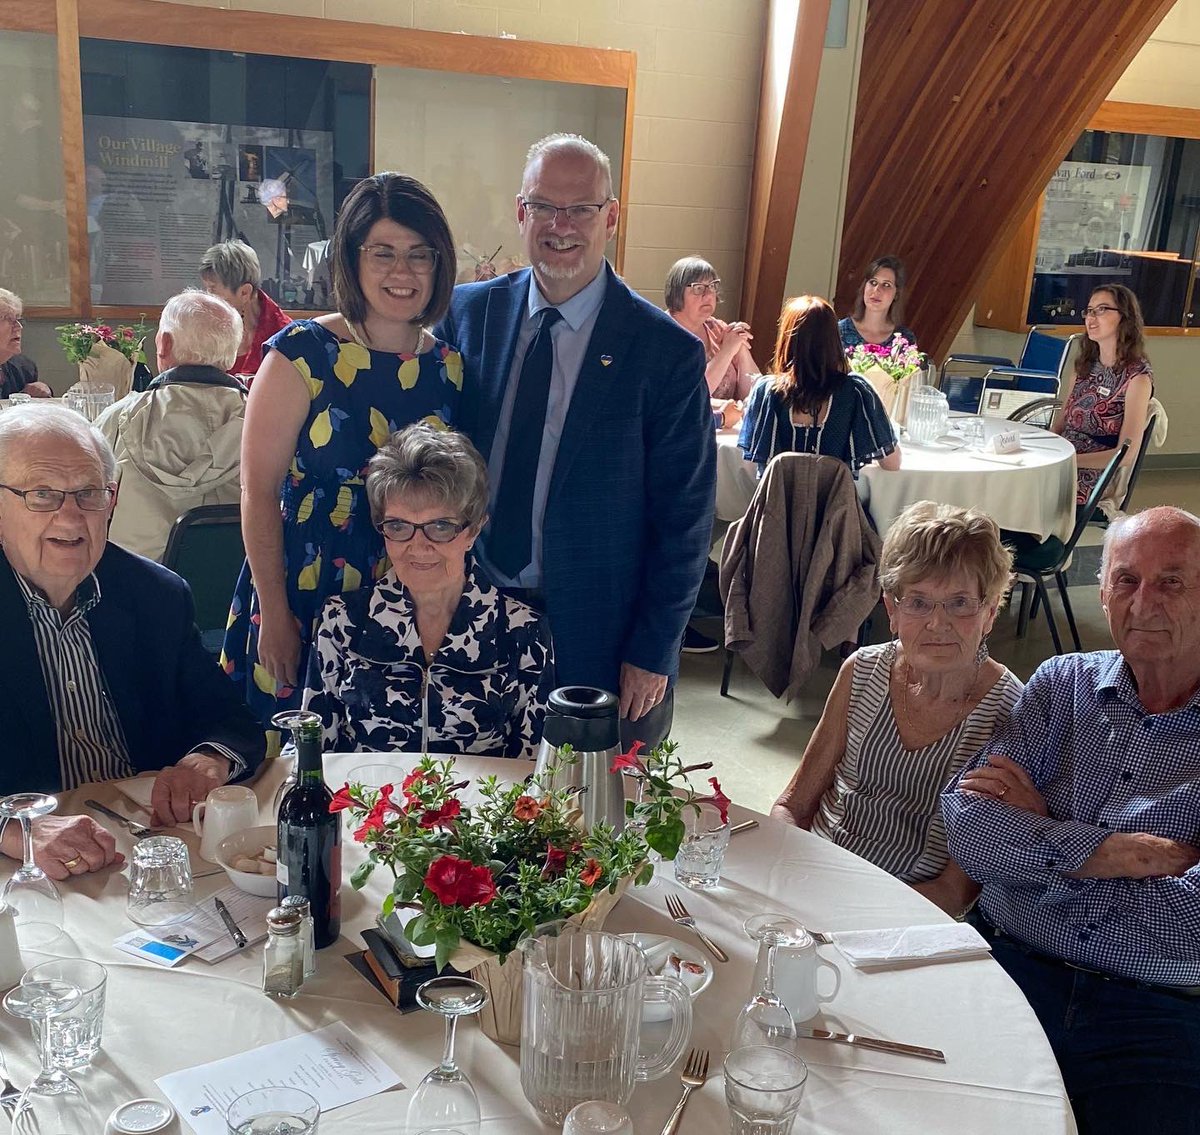 test Twitter Media - A wonderful evening with so many friends at the Mennonite Heritage Village Museum tonight for their spring dinner and the opening of their new exhibit “Leaving Canada” about the Mennonites in the 1920s who went to Mexico. It’s a wonderful museum telling important stories. https://t.co/ss9ujJ6kHf